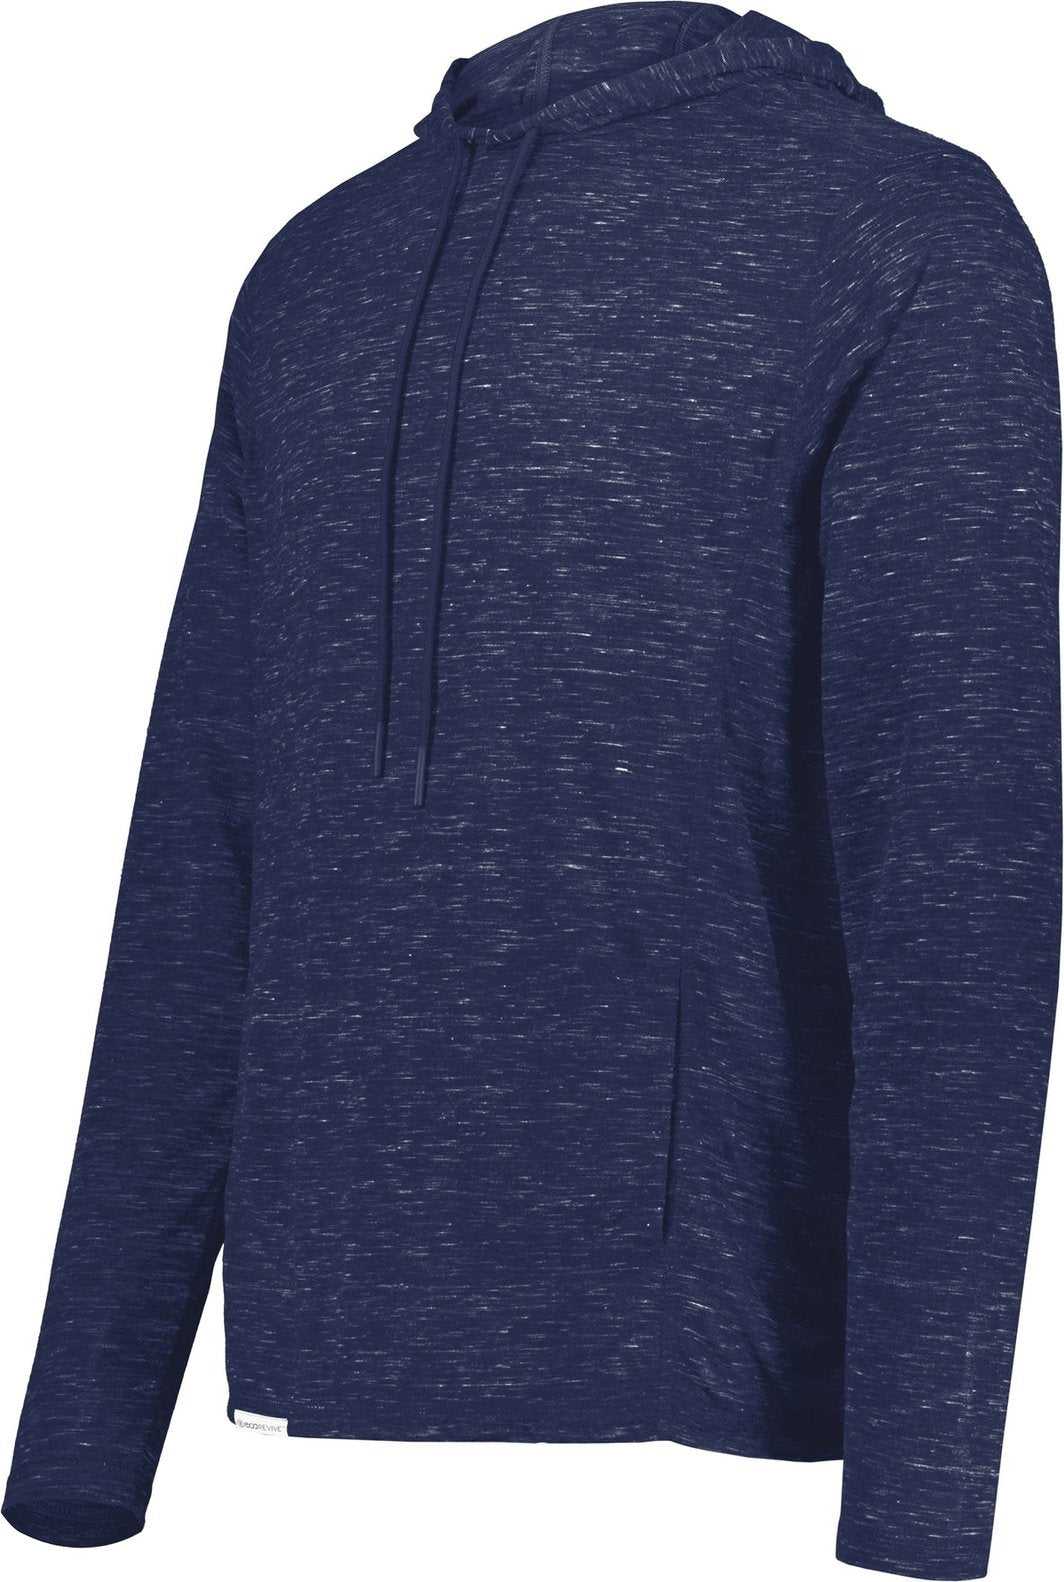 Holloway 222745 Monterey Hoodie - Navy Heather - HIT a Double